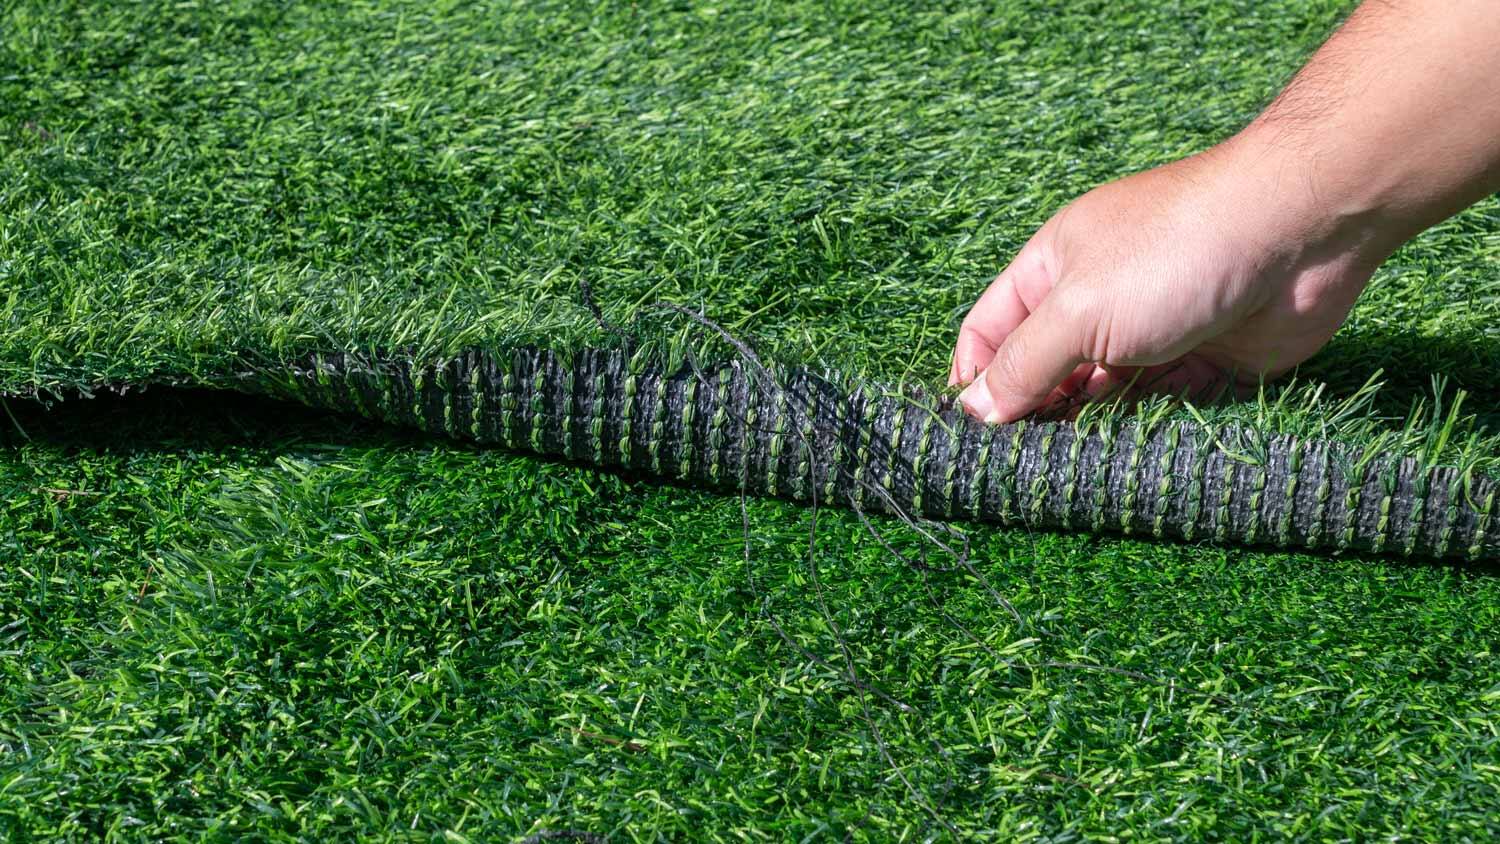 What Are The Negatives Of Artificial Grass